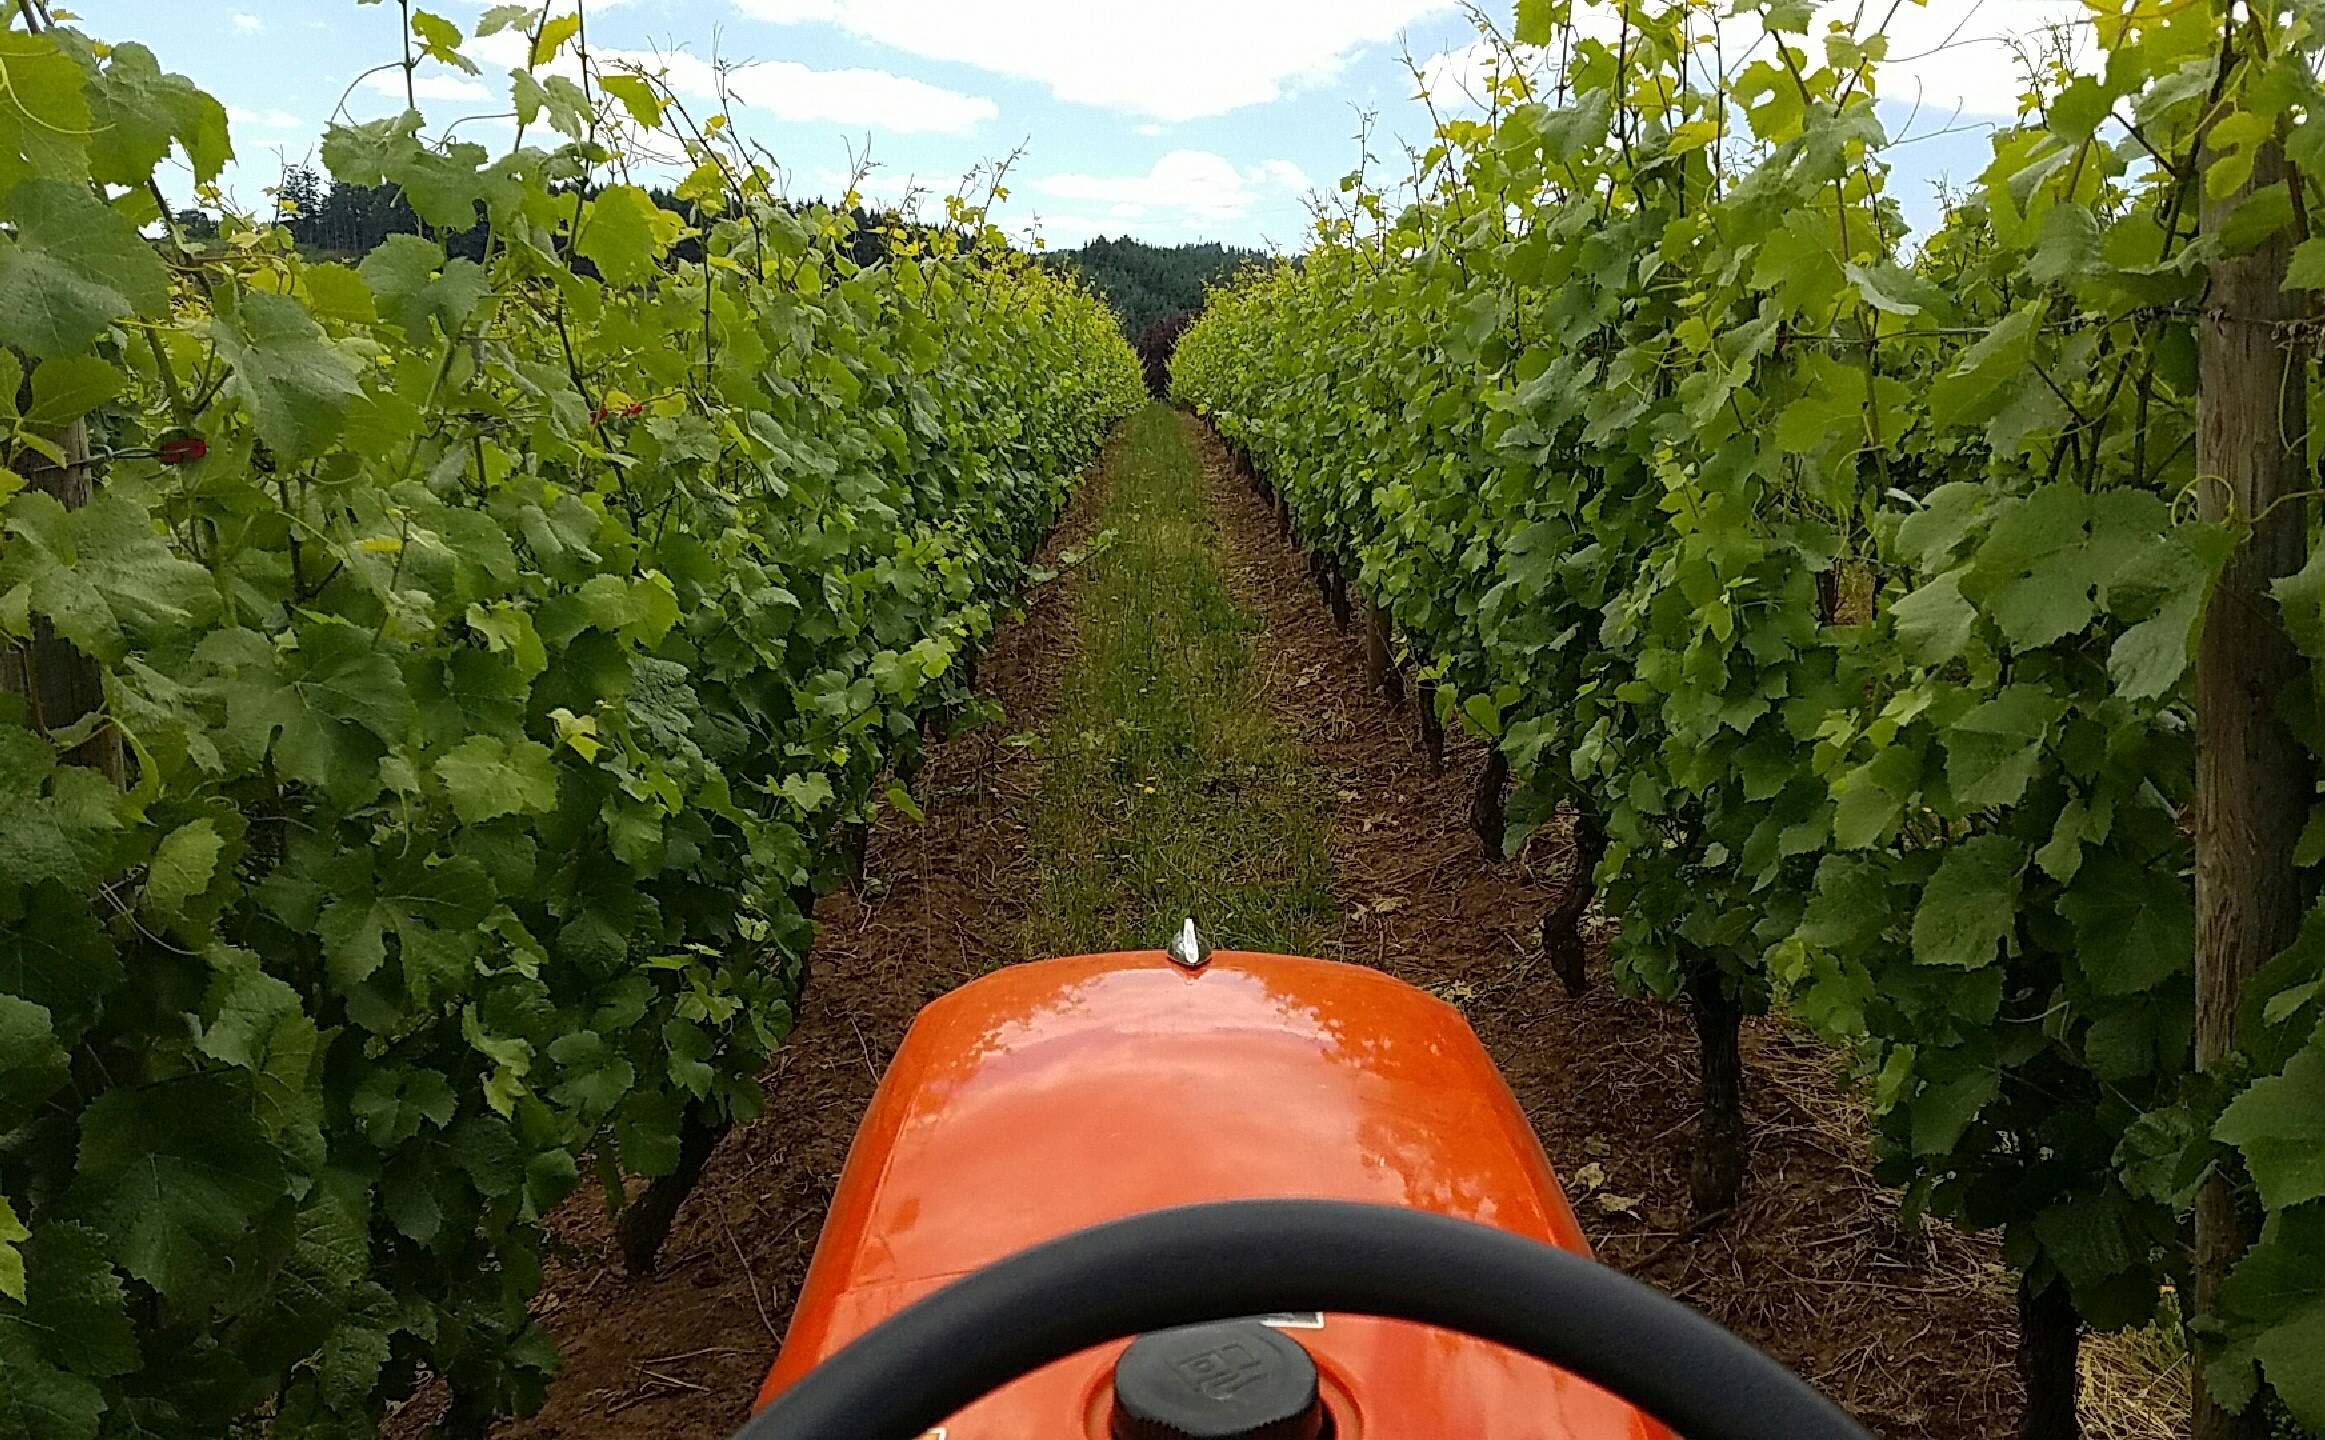 View of One Heart Vineyard from orange tractor between rows